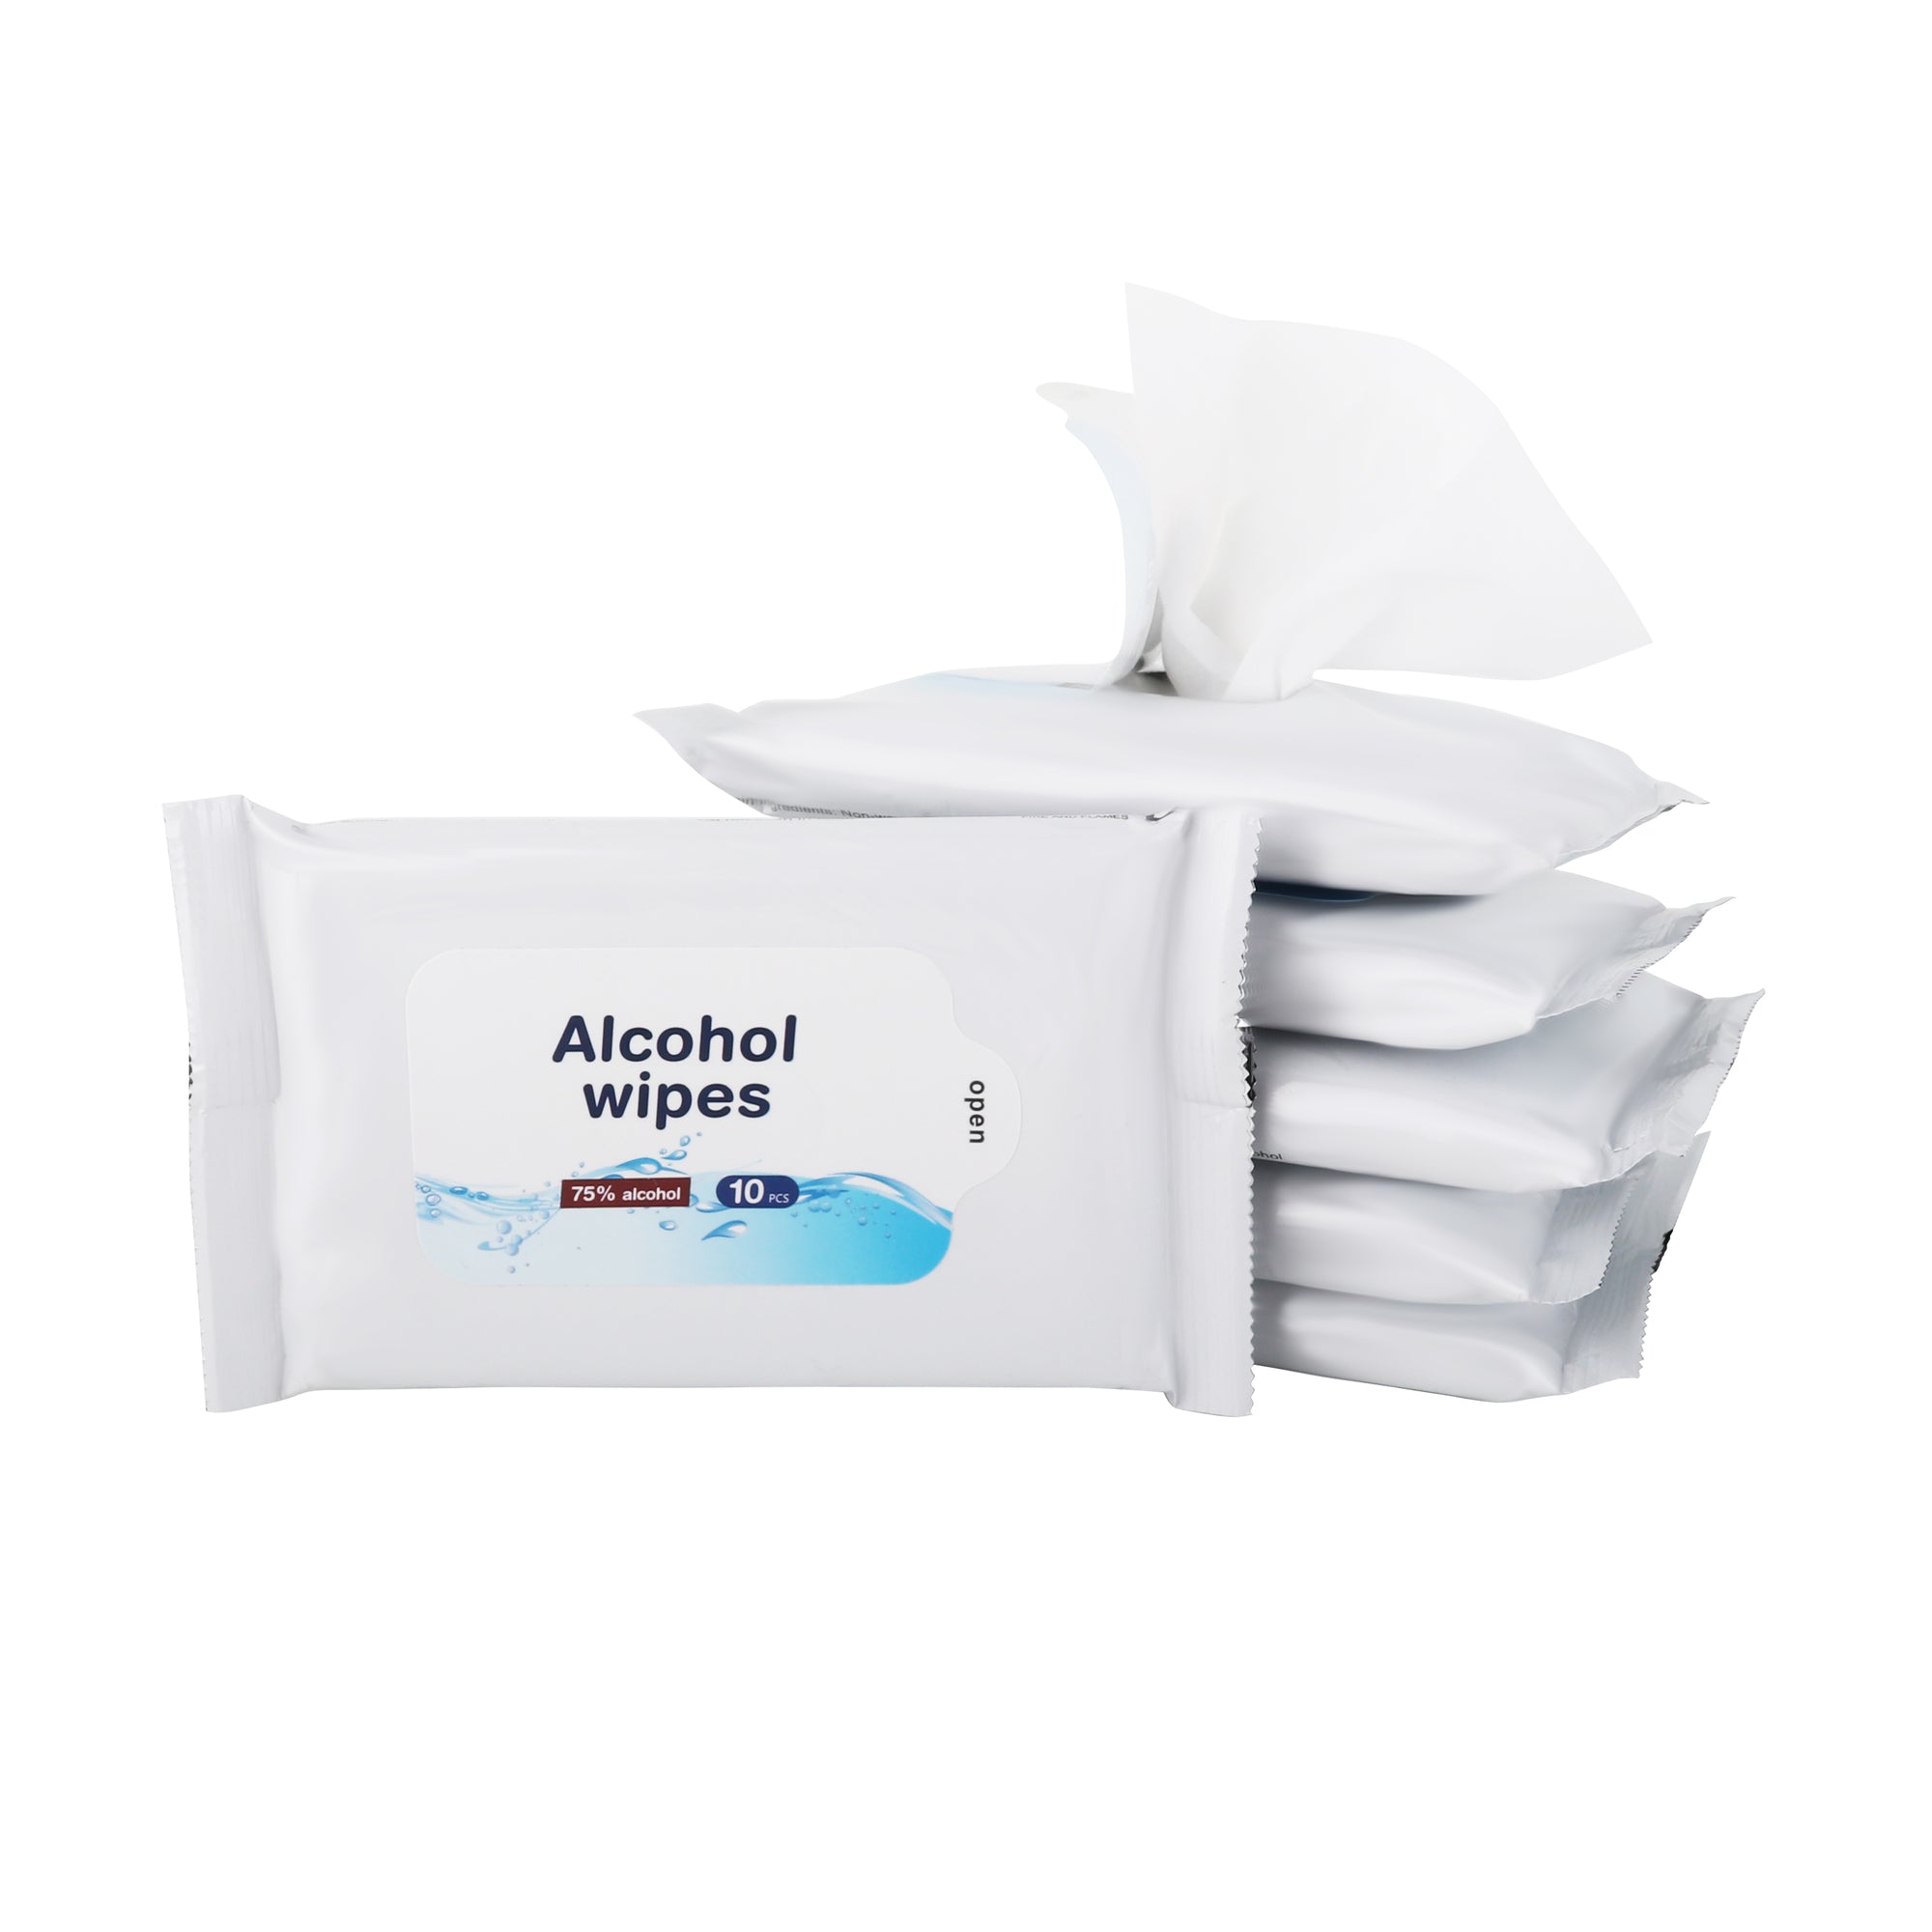 Stock 75% Alcohol Wet Wipes - 10PC Pack (SHS-23P)